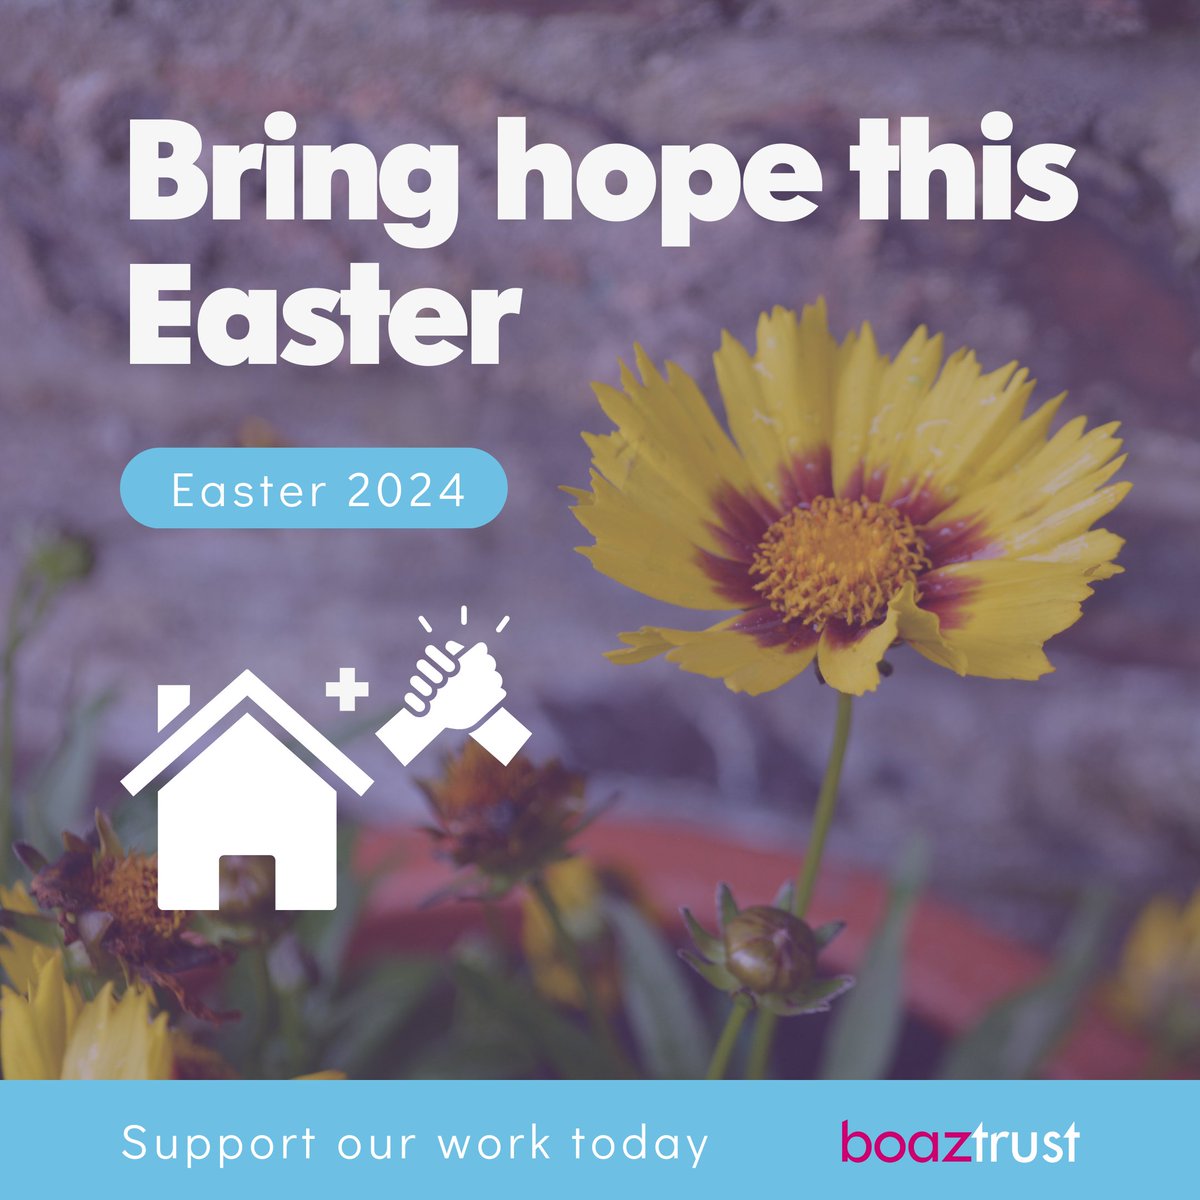 Could you be a hope-bringer this #Easter? 🧡 We want to see people who seek safety here welcomed and free to live life in all its fullness. Not scapegoated, not abused, not forced into homelessness. We’d love for you to stand with us. Find out more at: rb.gy/qxkjpb